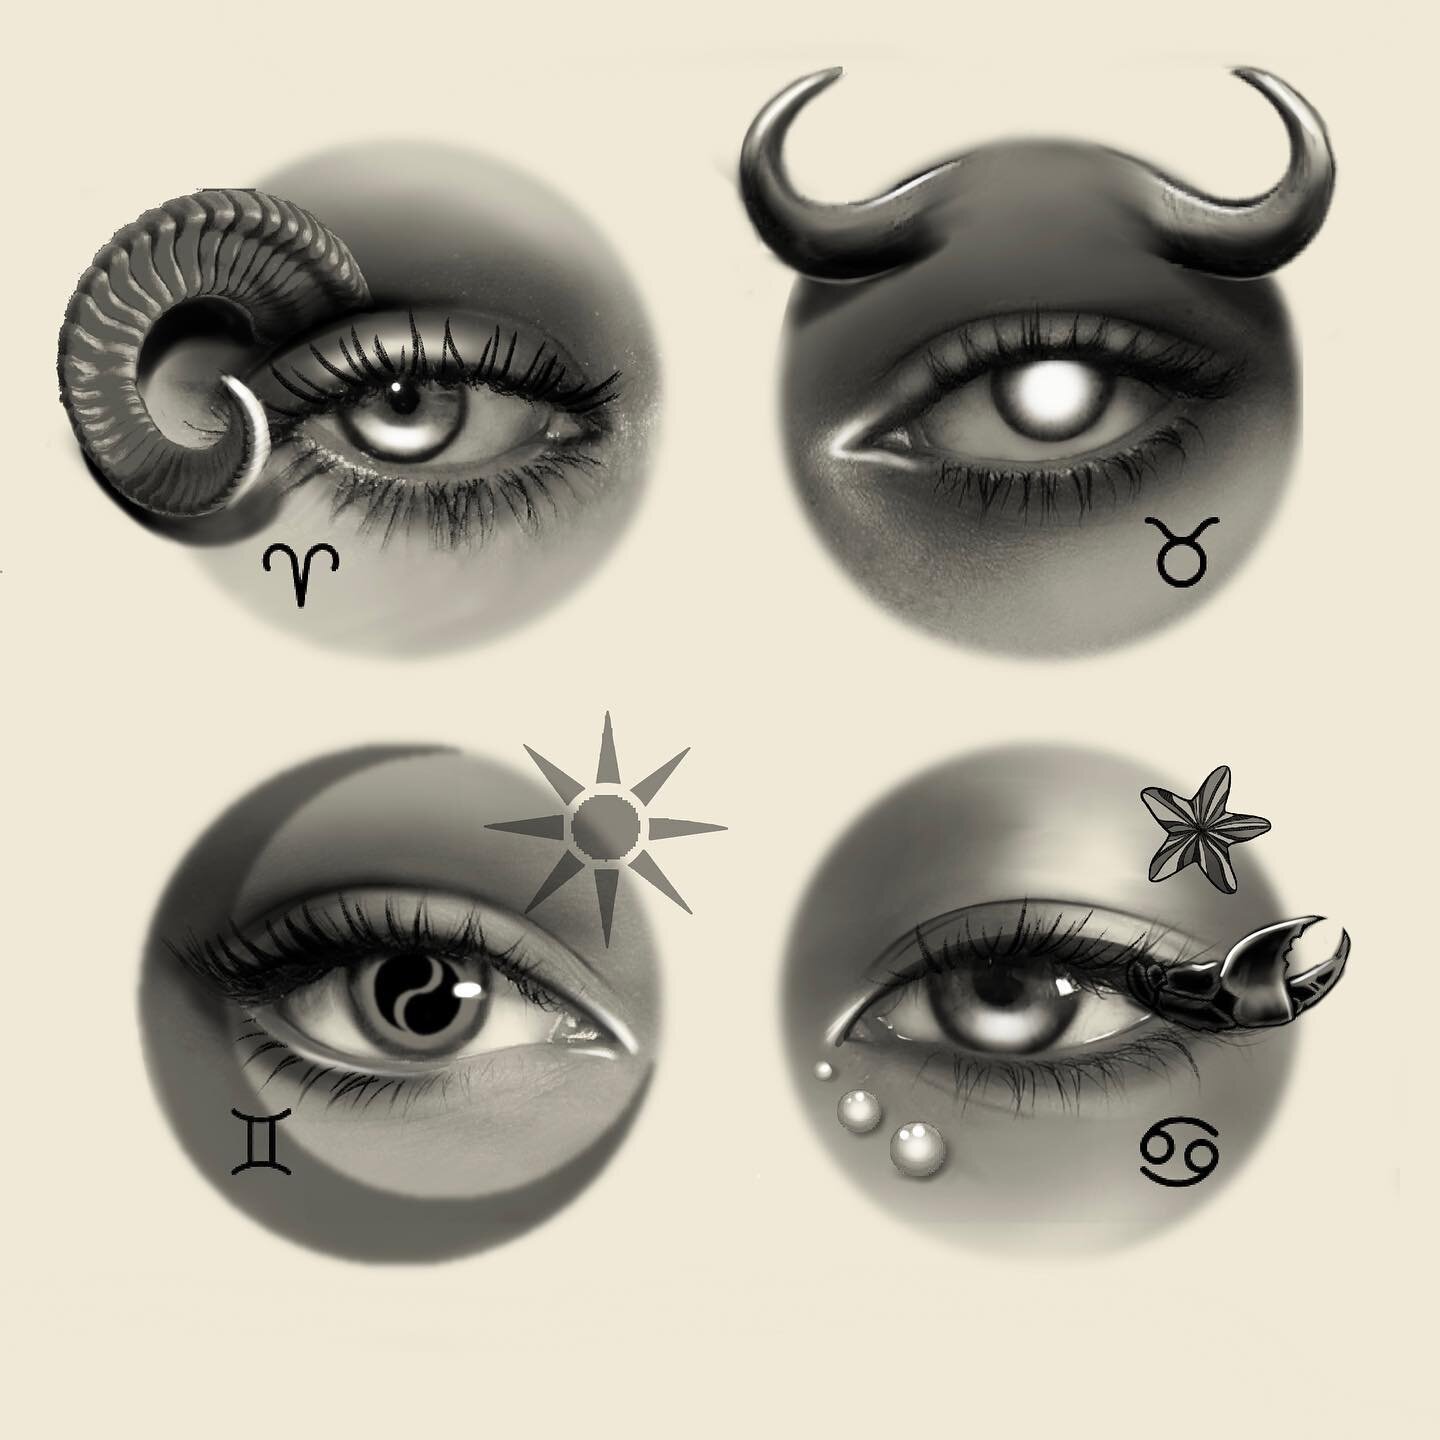 💫 Astrology Eye Flash!! 💫 
The eye designs I made a while ago were the most popular, so I made ones with astrology :)

DM me if interested!

**Design repeatable
**2-2.5 inches minimum
**I charge apprentice flat rate (Let me know if you have a budge